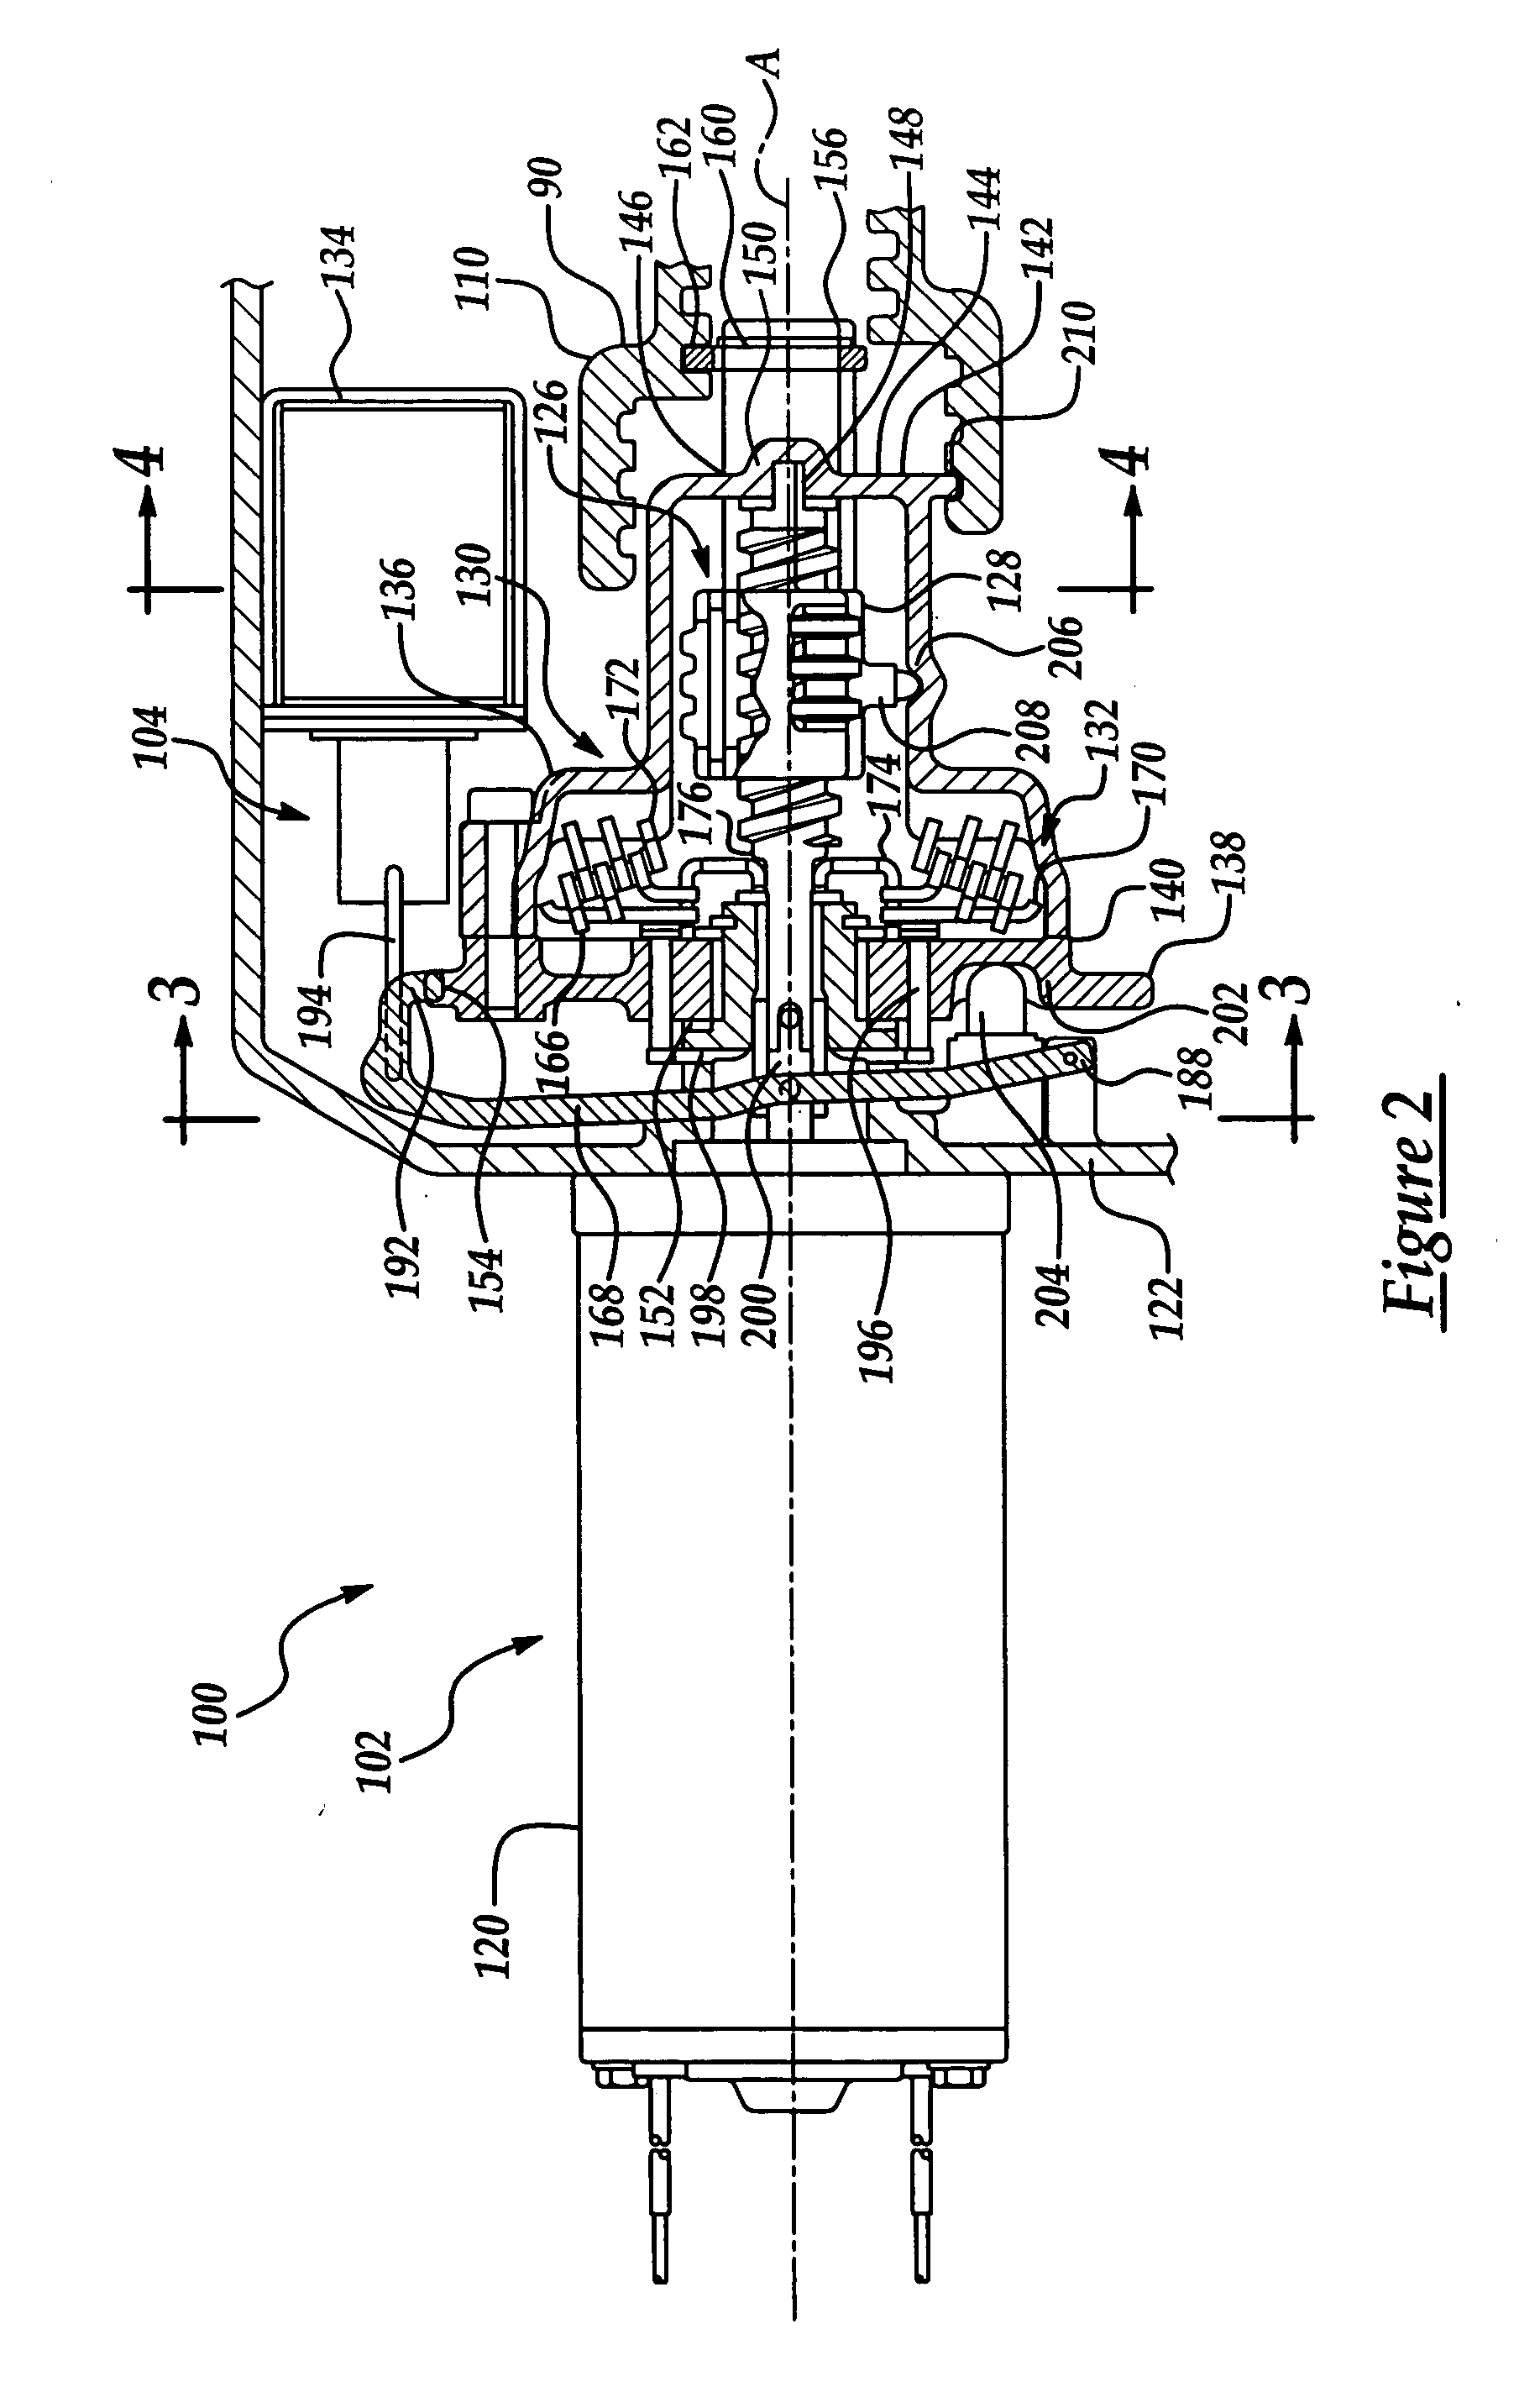 Transmission having an electro-mechanical gear actuation system